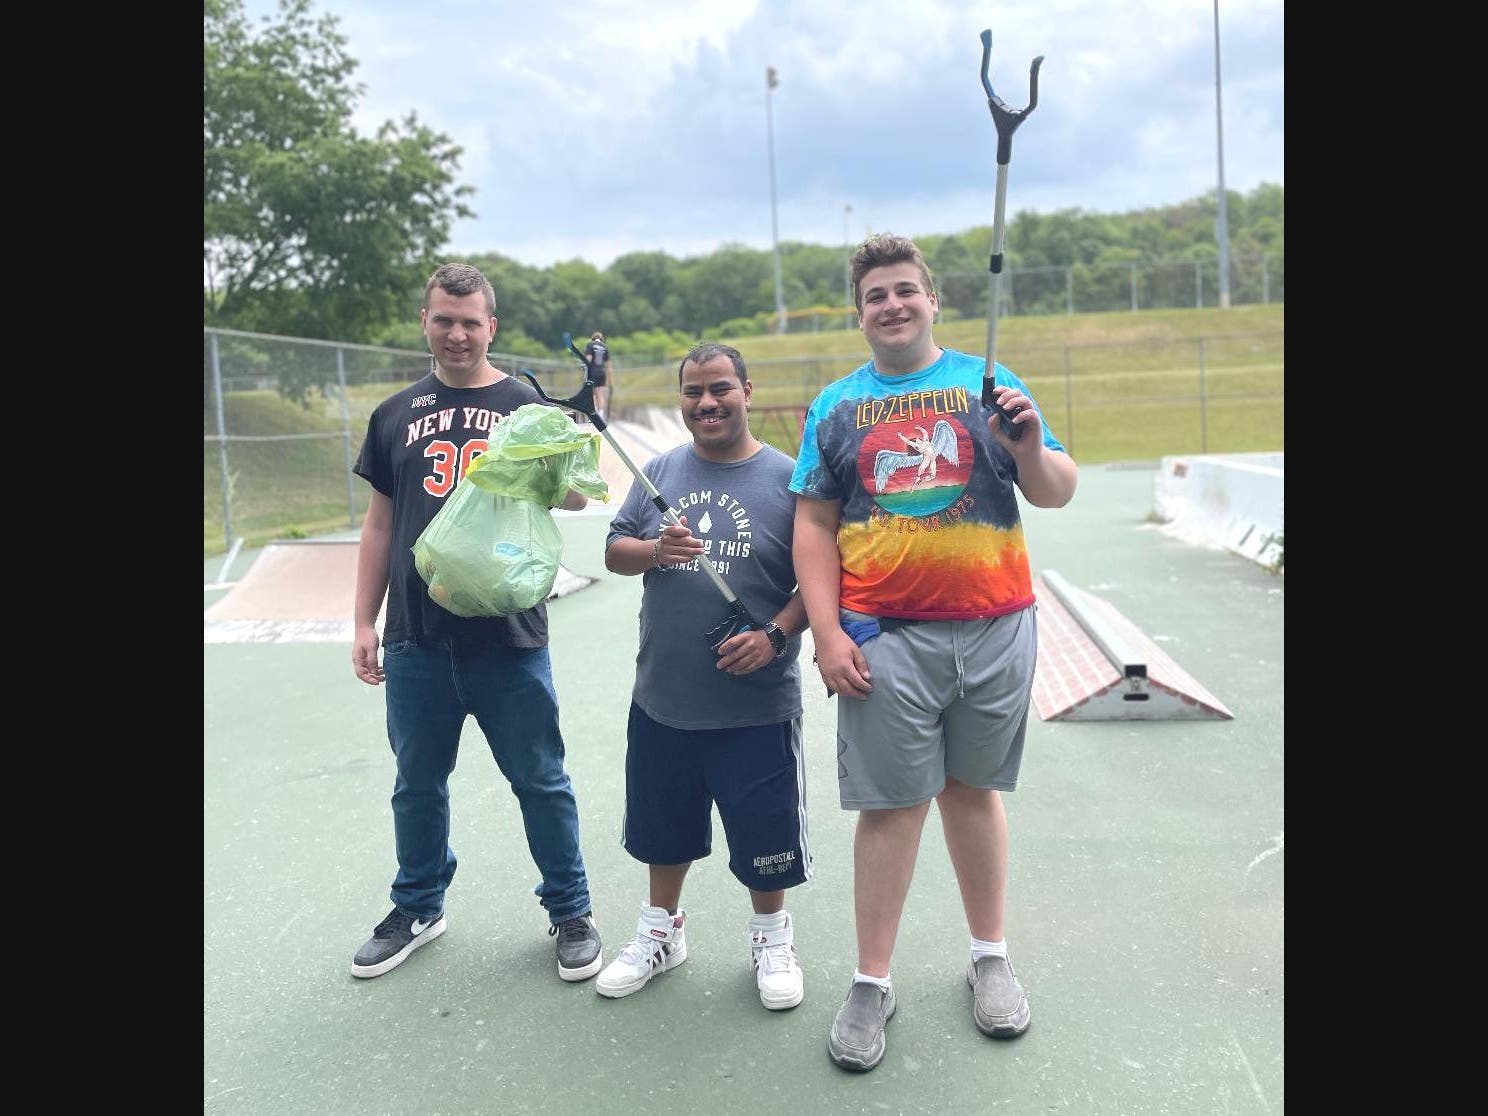 https://patch.com/img/cdn20/users/23577477/20230712/024012/styles/patch_image/public/guys-cleaning-up-the-local-skate-park___12143019347.jpg